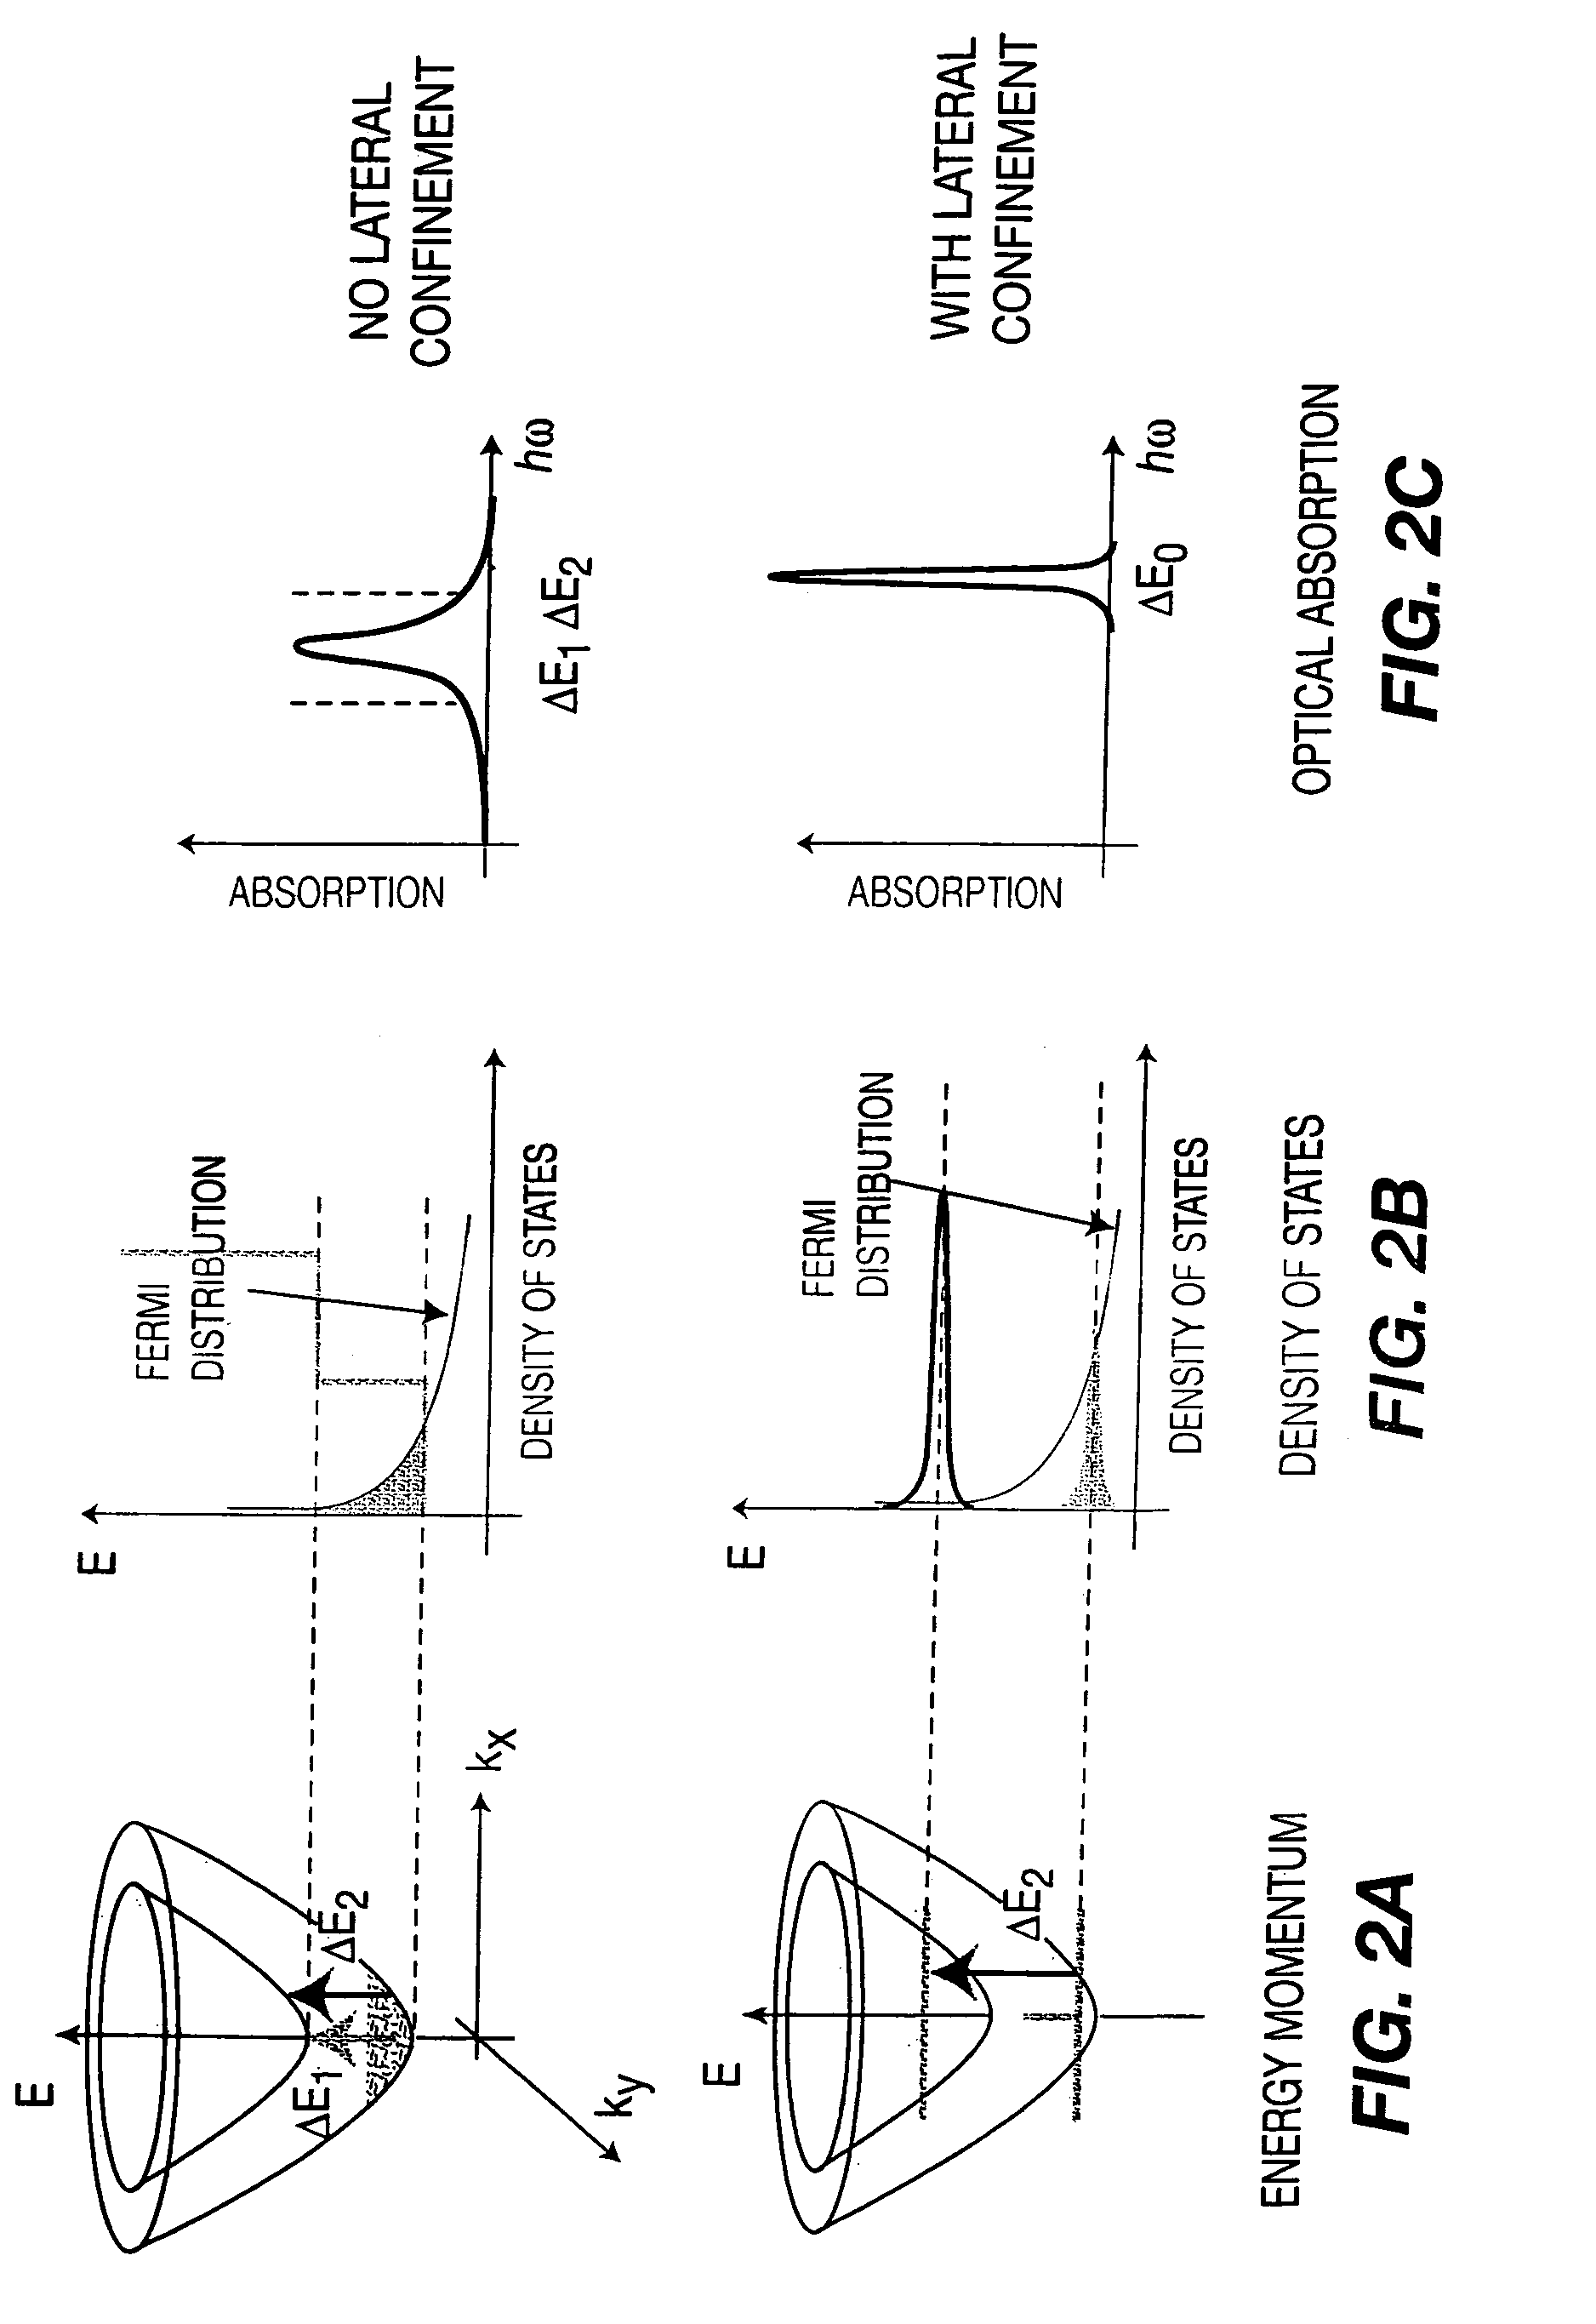 Electrically tunable quantum dots and methods for making and using same